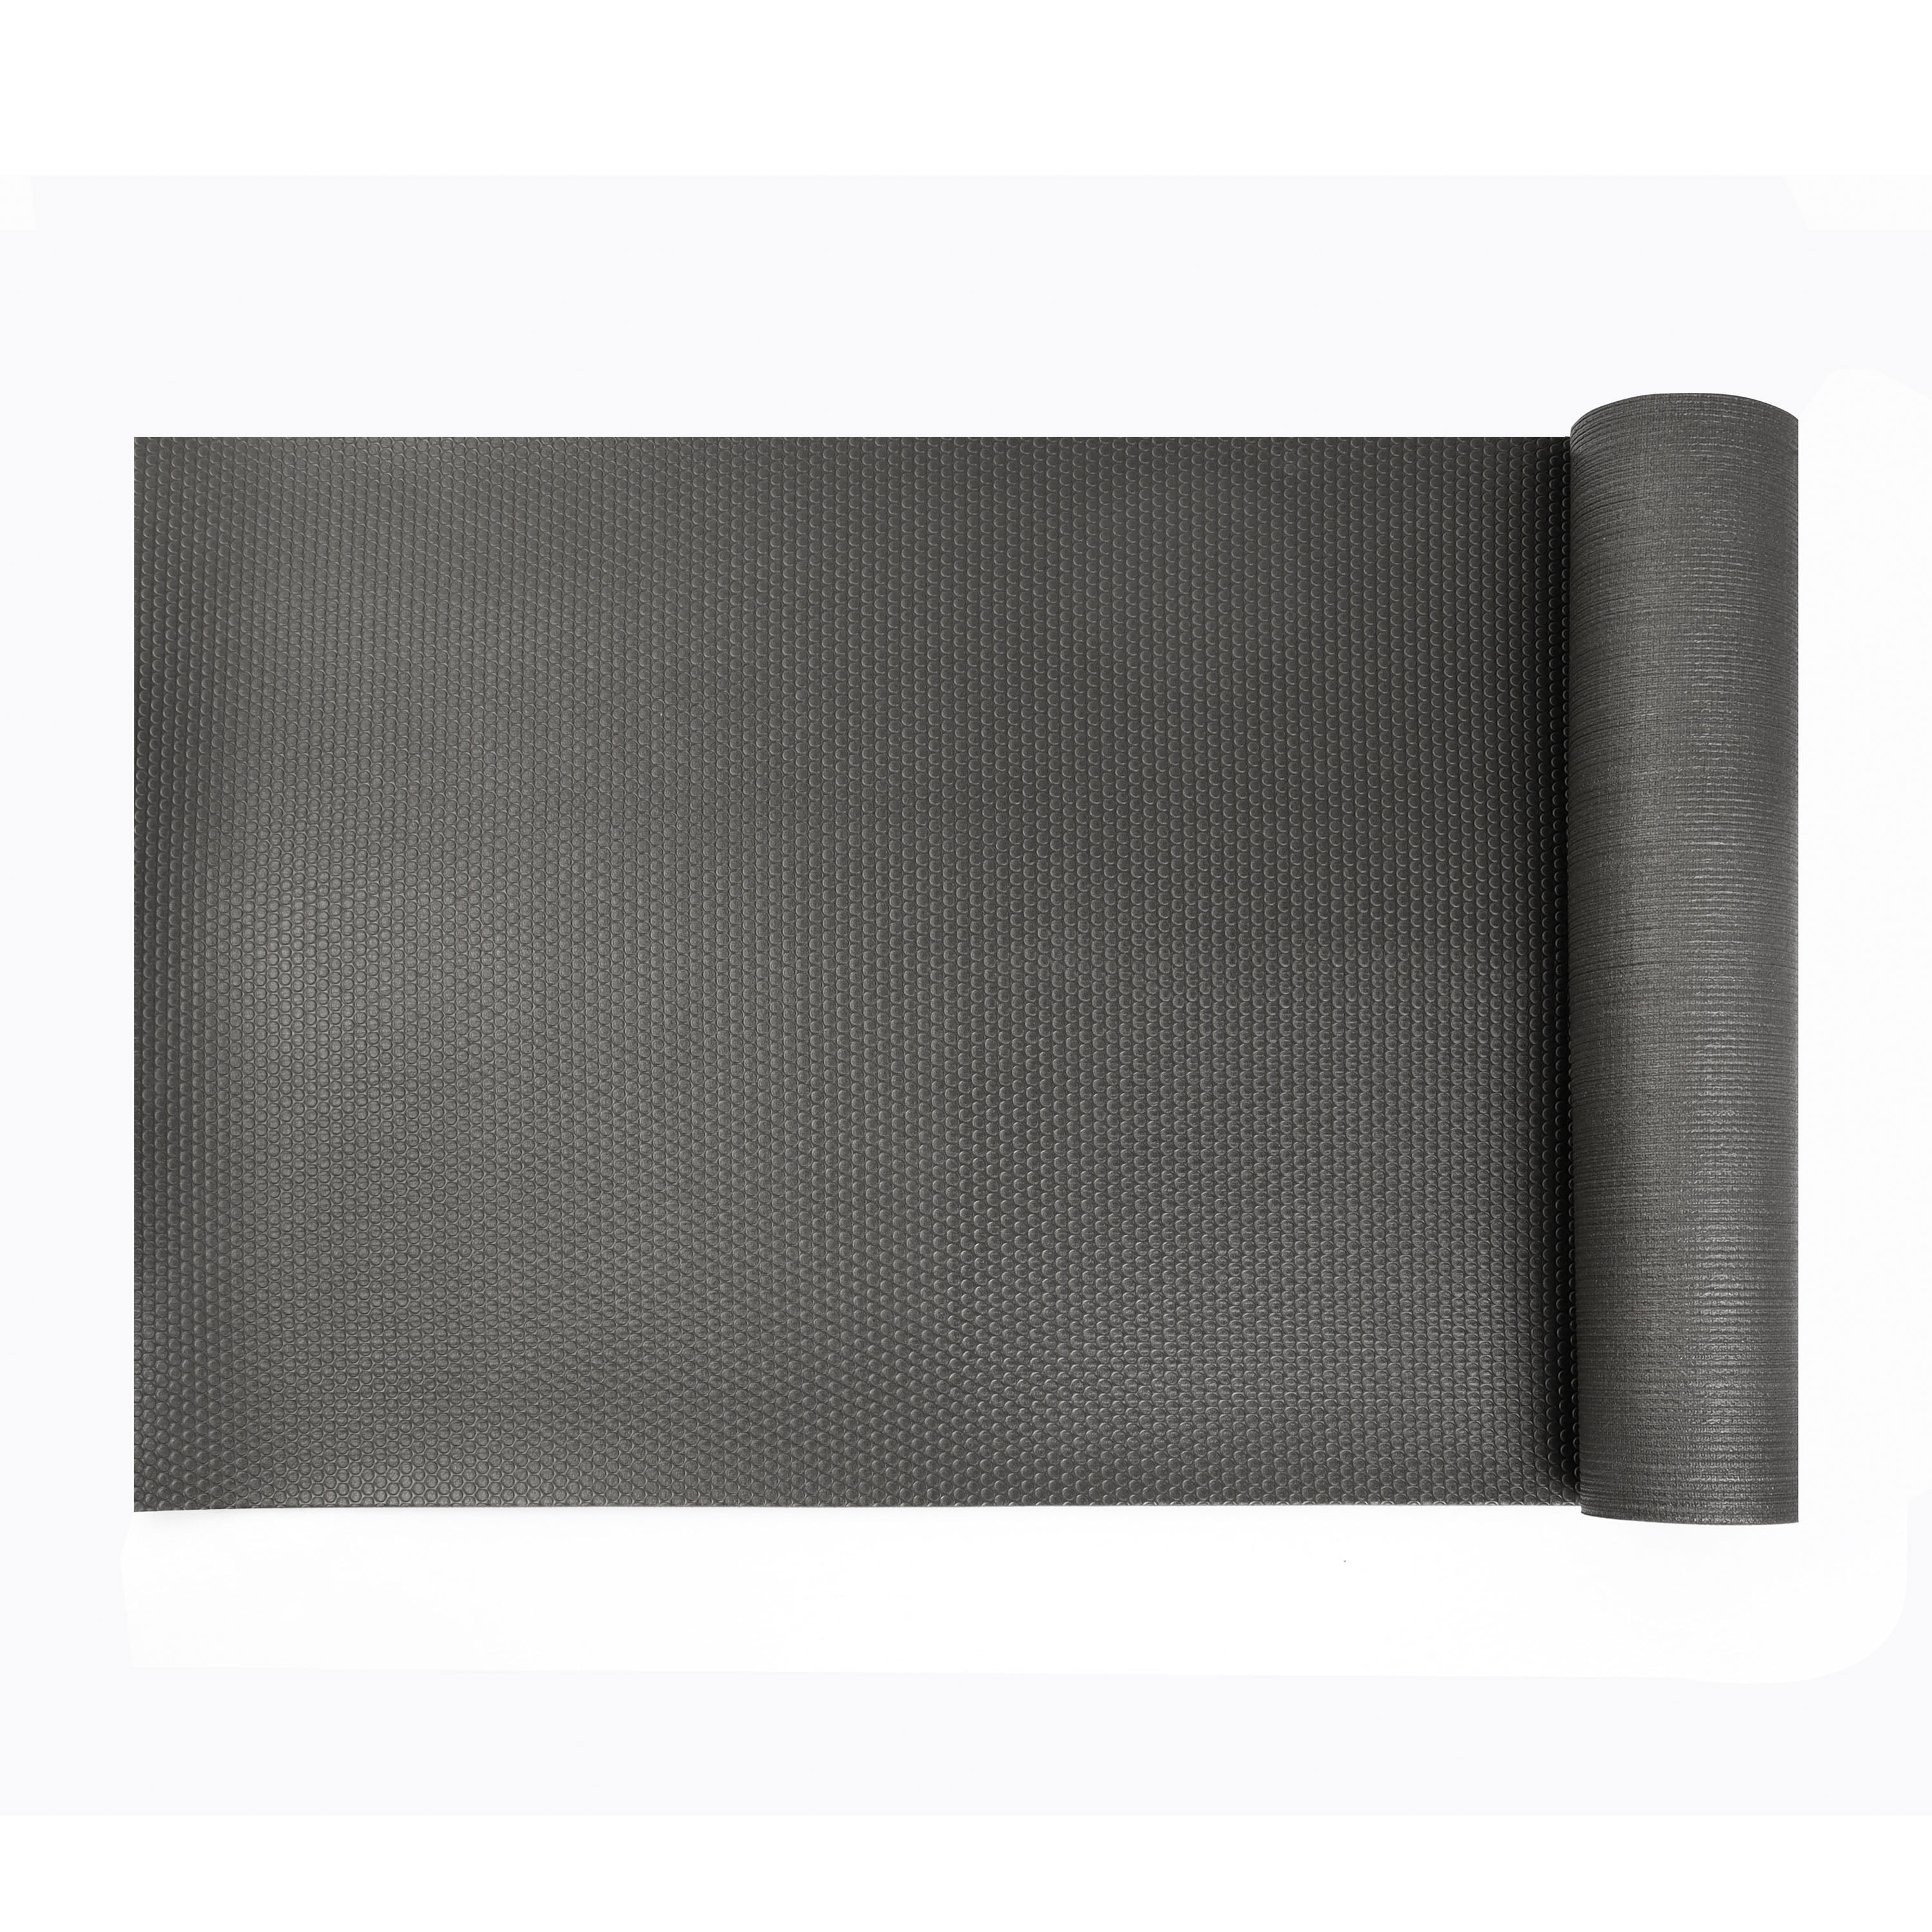 Athletic Works High Density Pro Mat, 6MM, 68inx24in, Black, Ultra Thick, PVC, Durable Slip Resistance